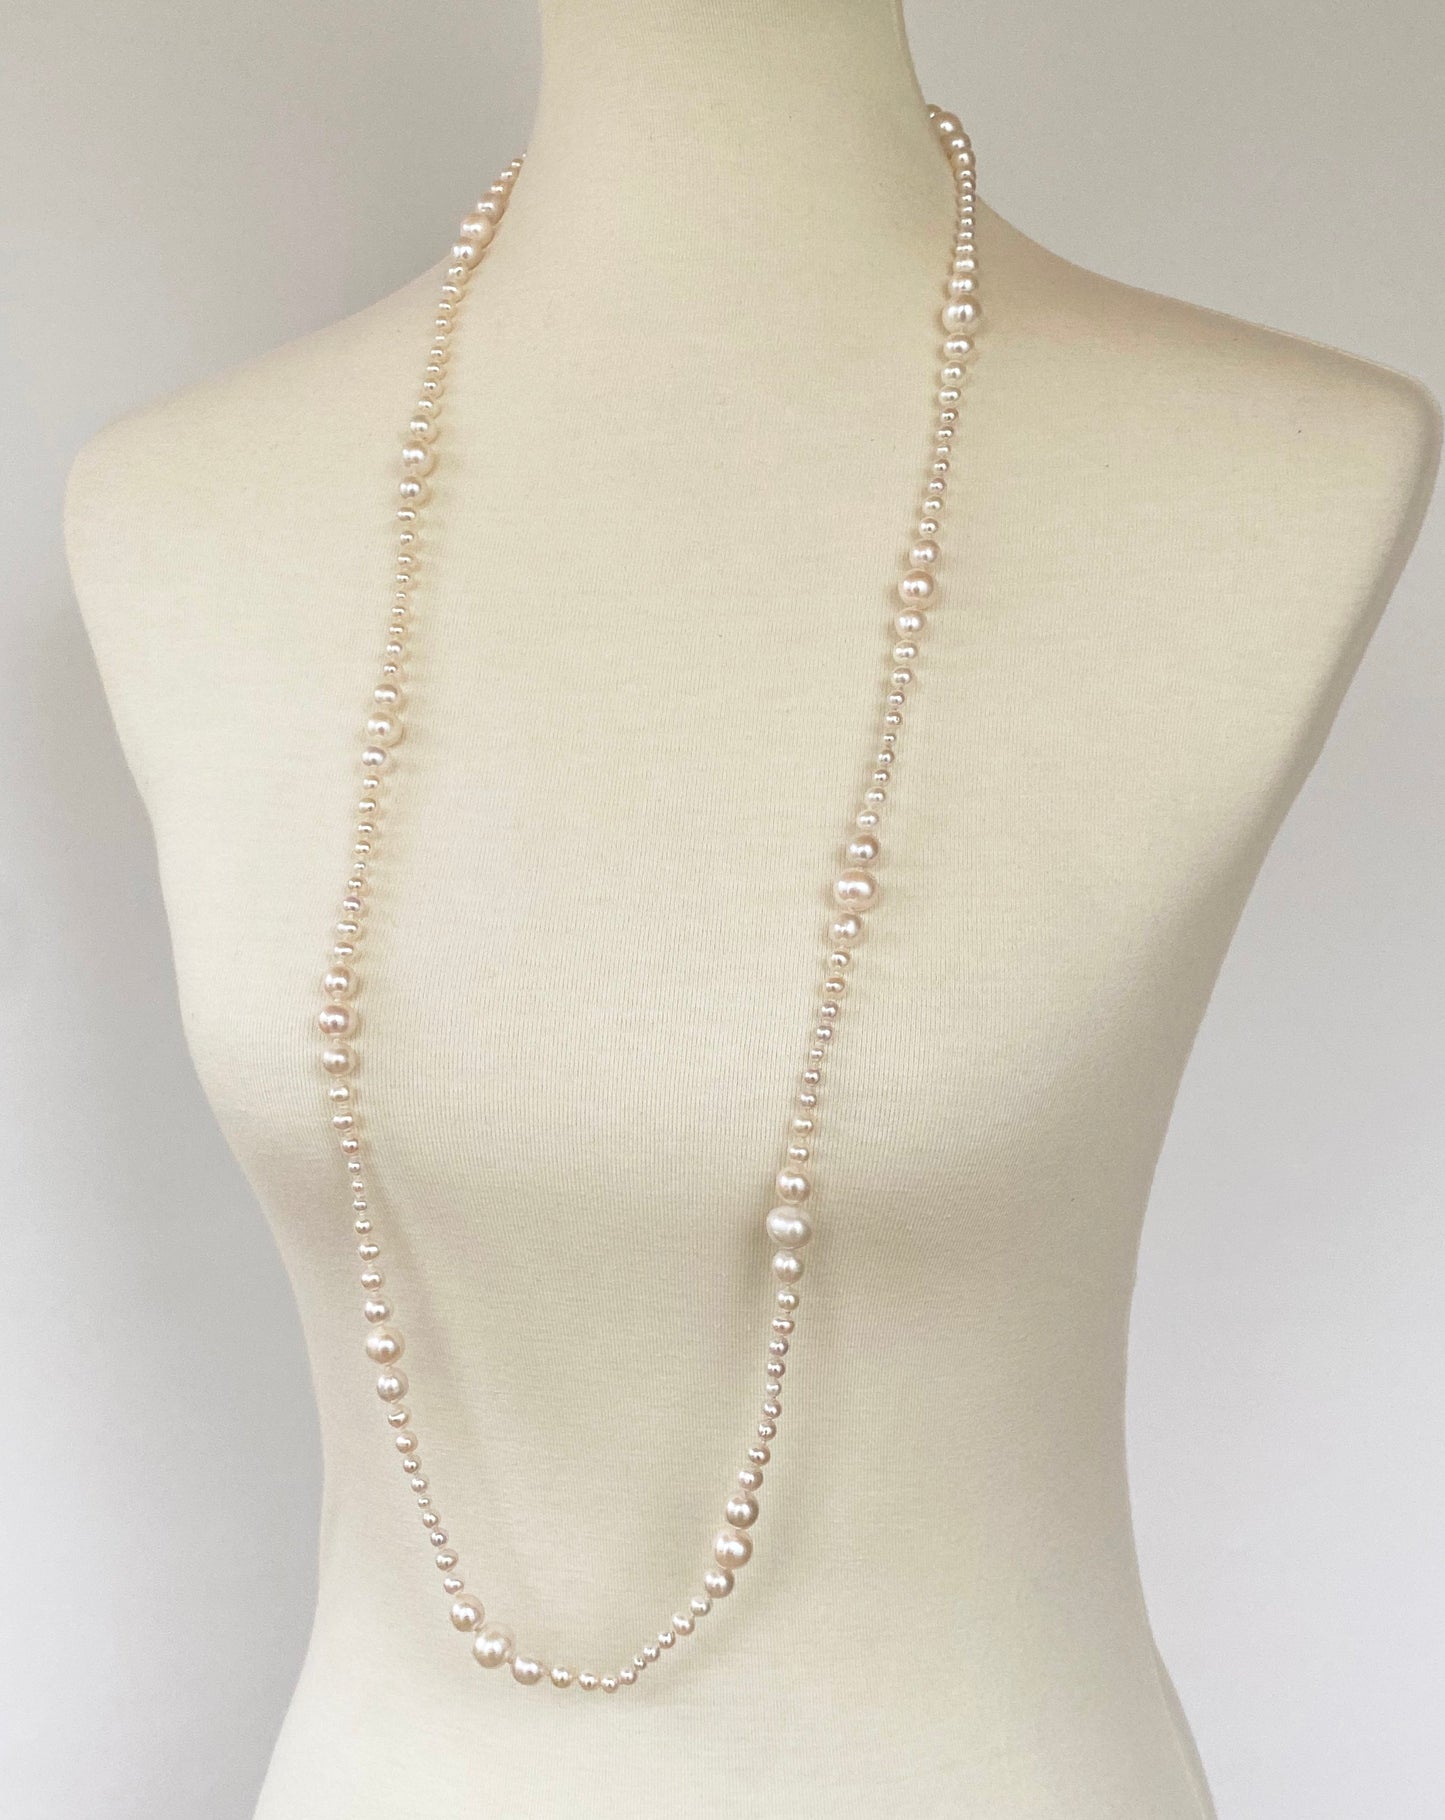 Graduated Pearl Necklace with 14k White Gold Clasp